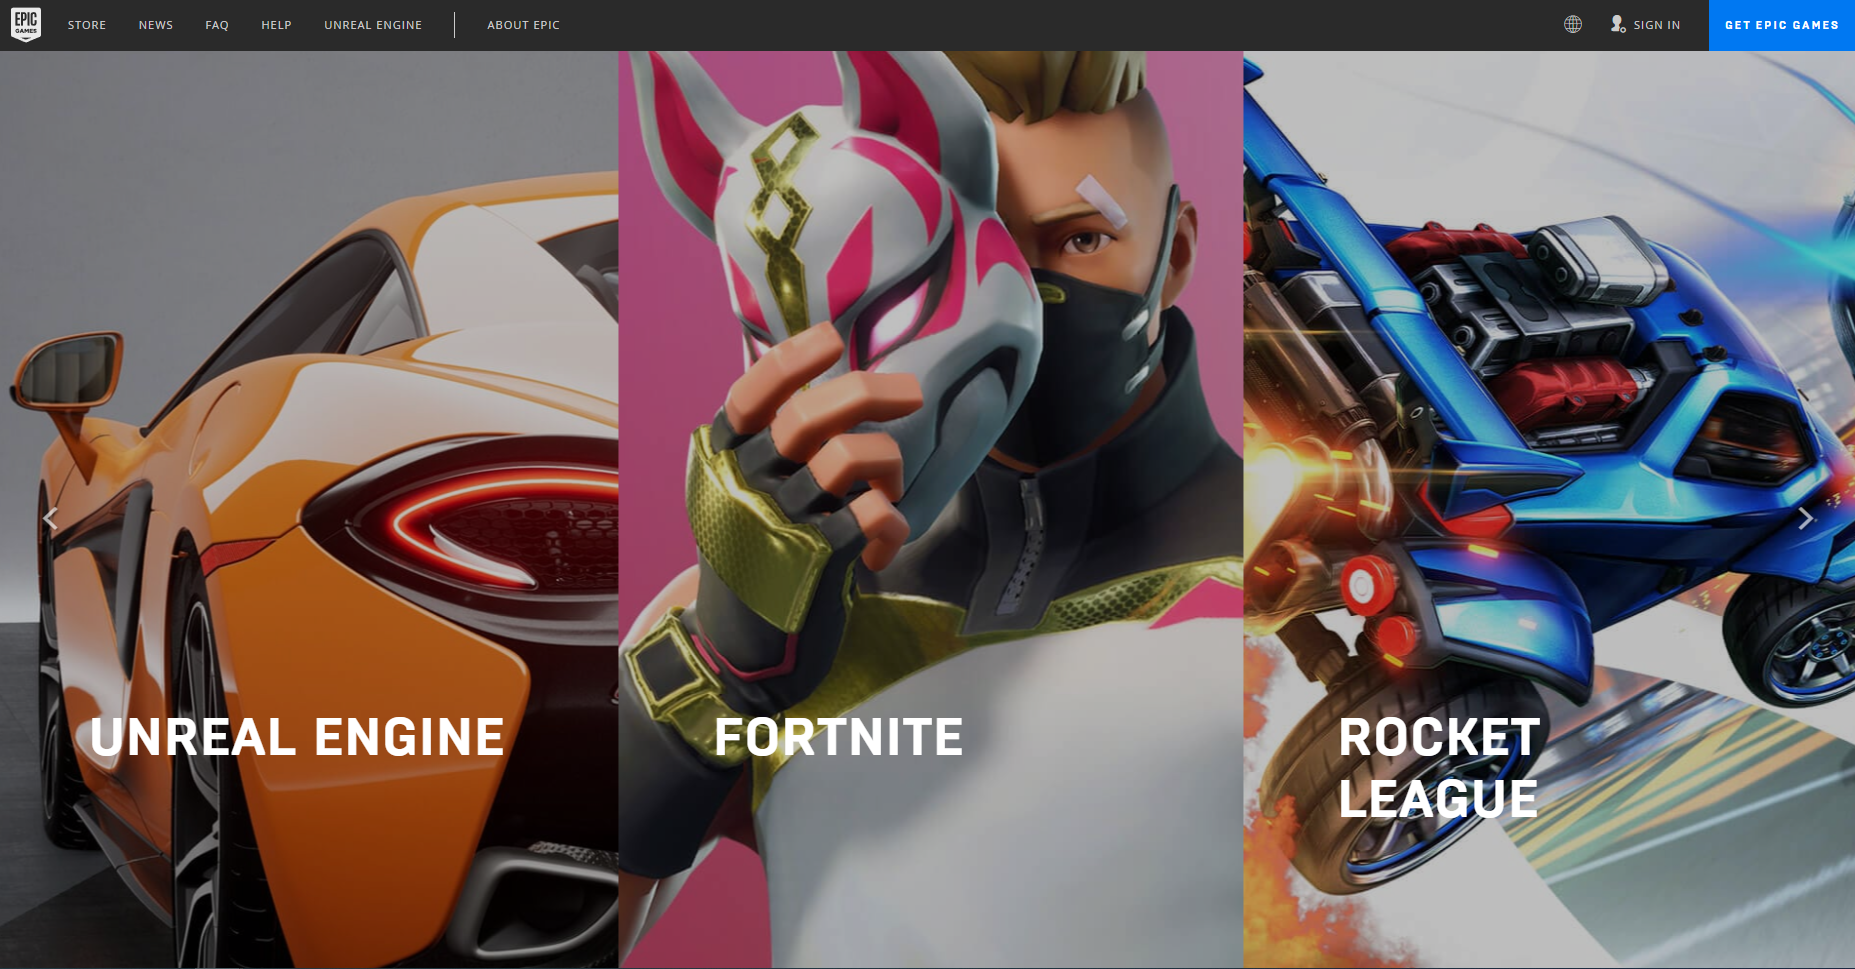 Epic Games Home Page